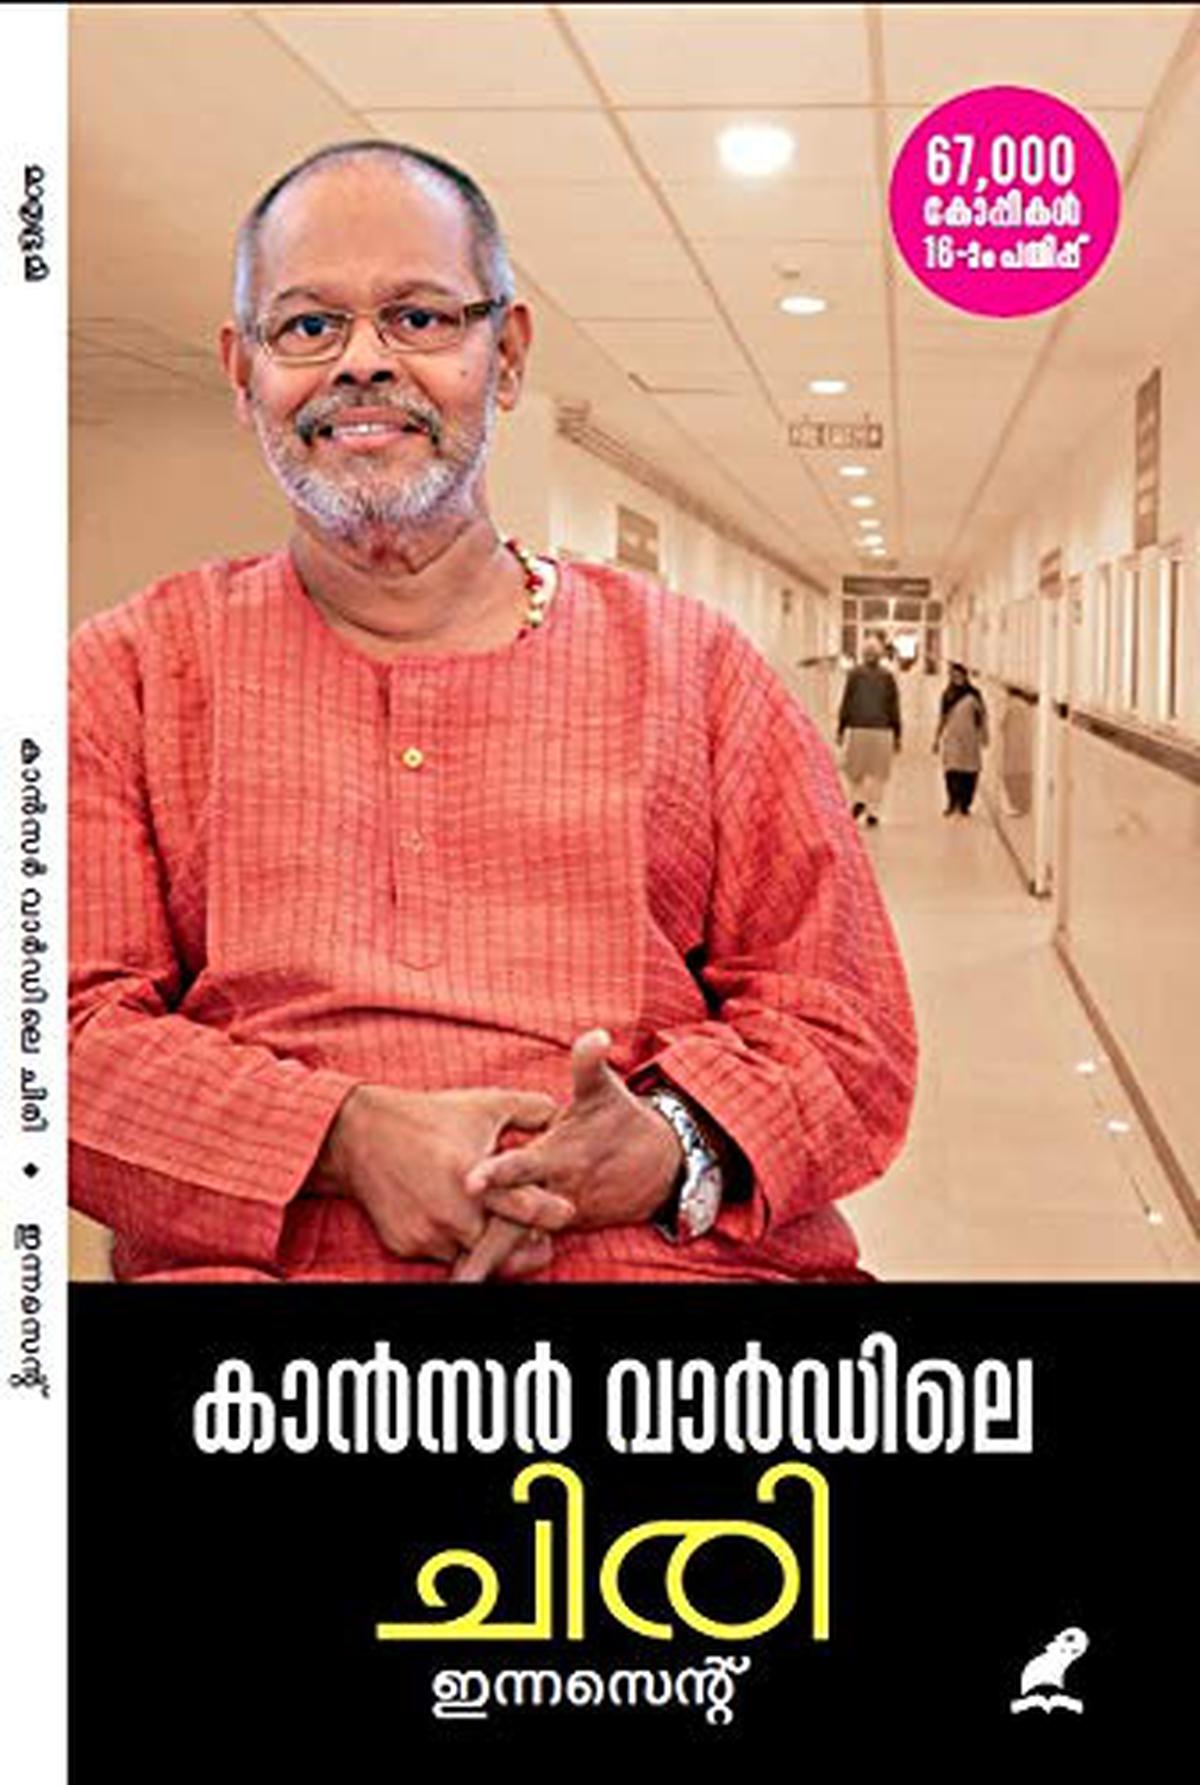 Cover of Innocent’s book ‘Cancer Wardile Chiri’